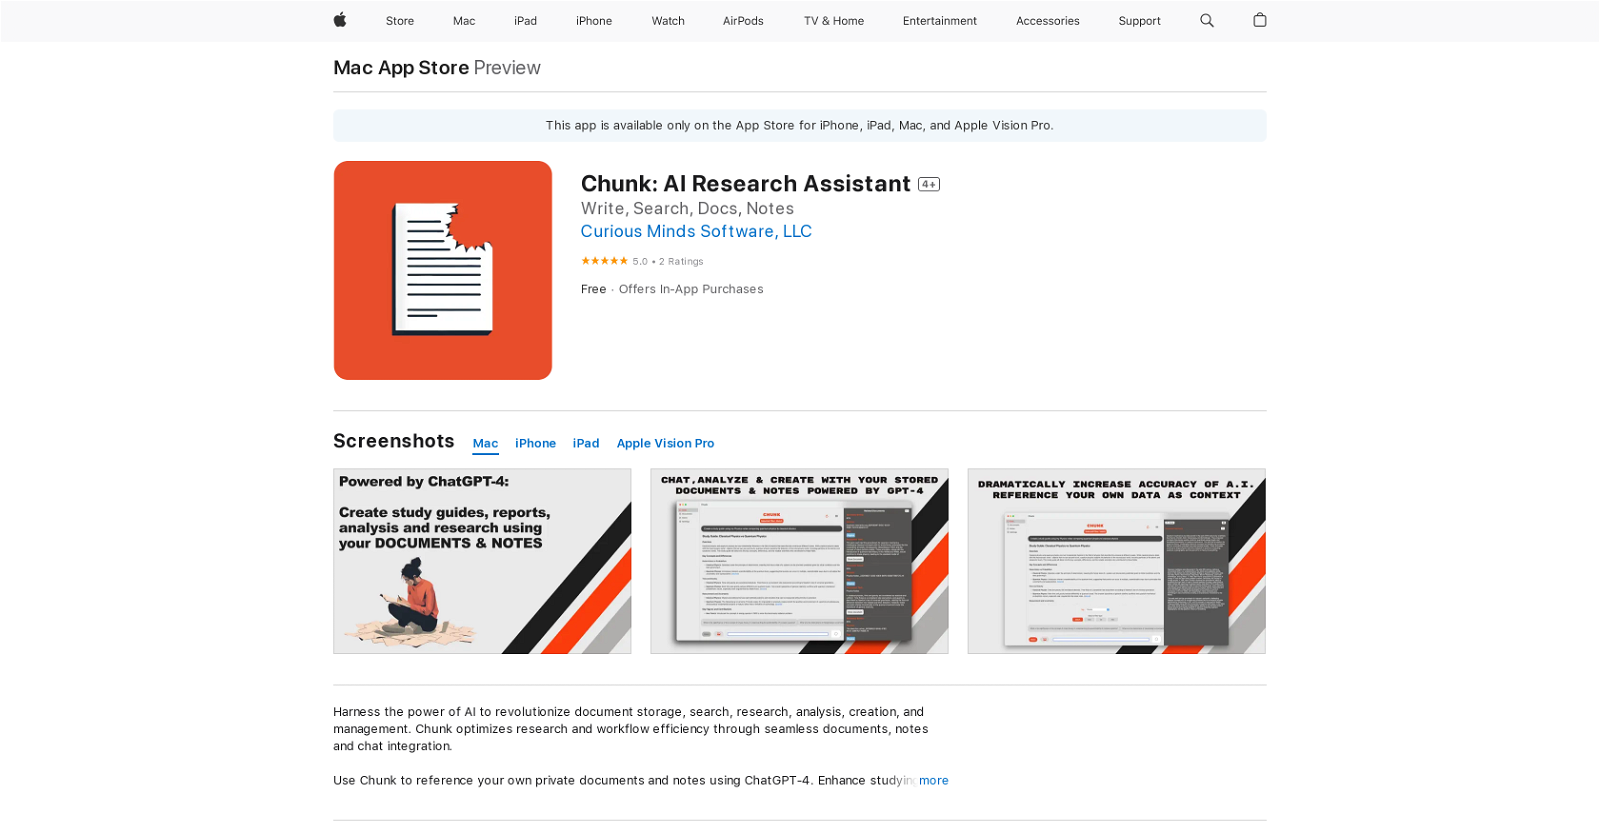 Chunk: AI Research Assistant website